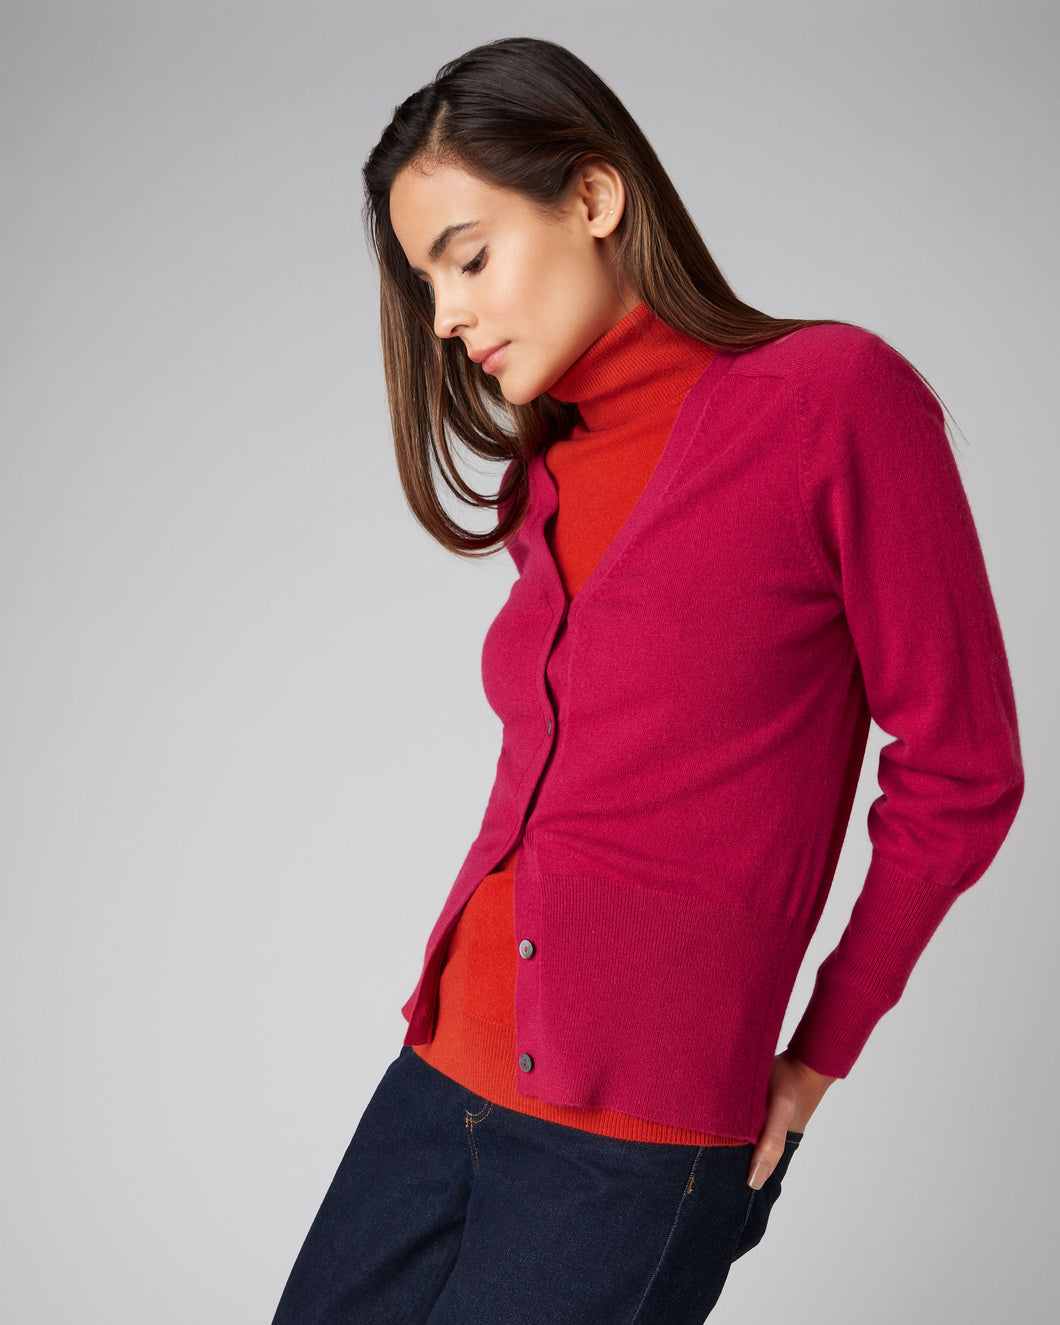 N.Peal Women's V Necked Cashmere Cardigan Raspberry Pink